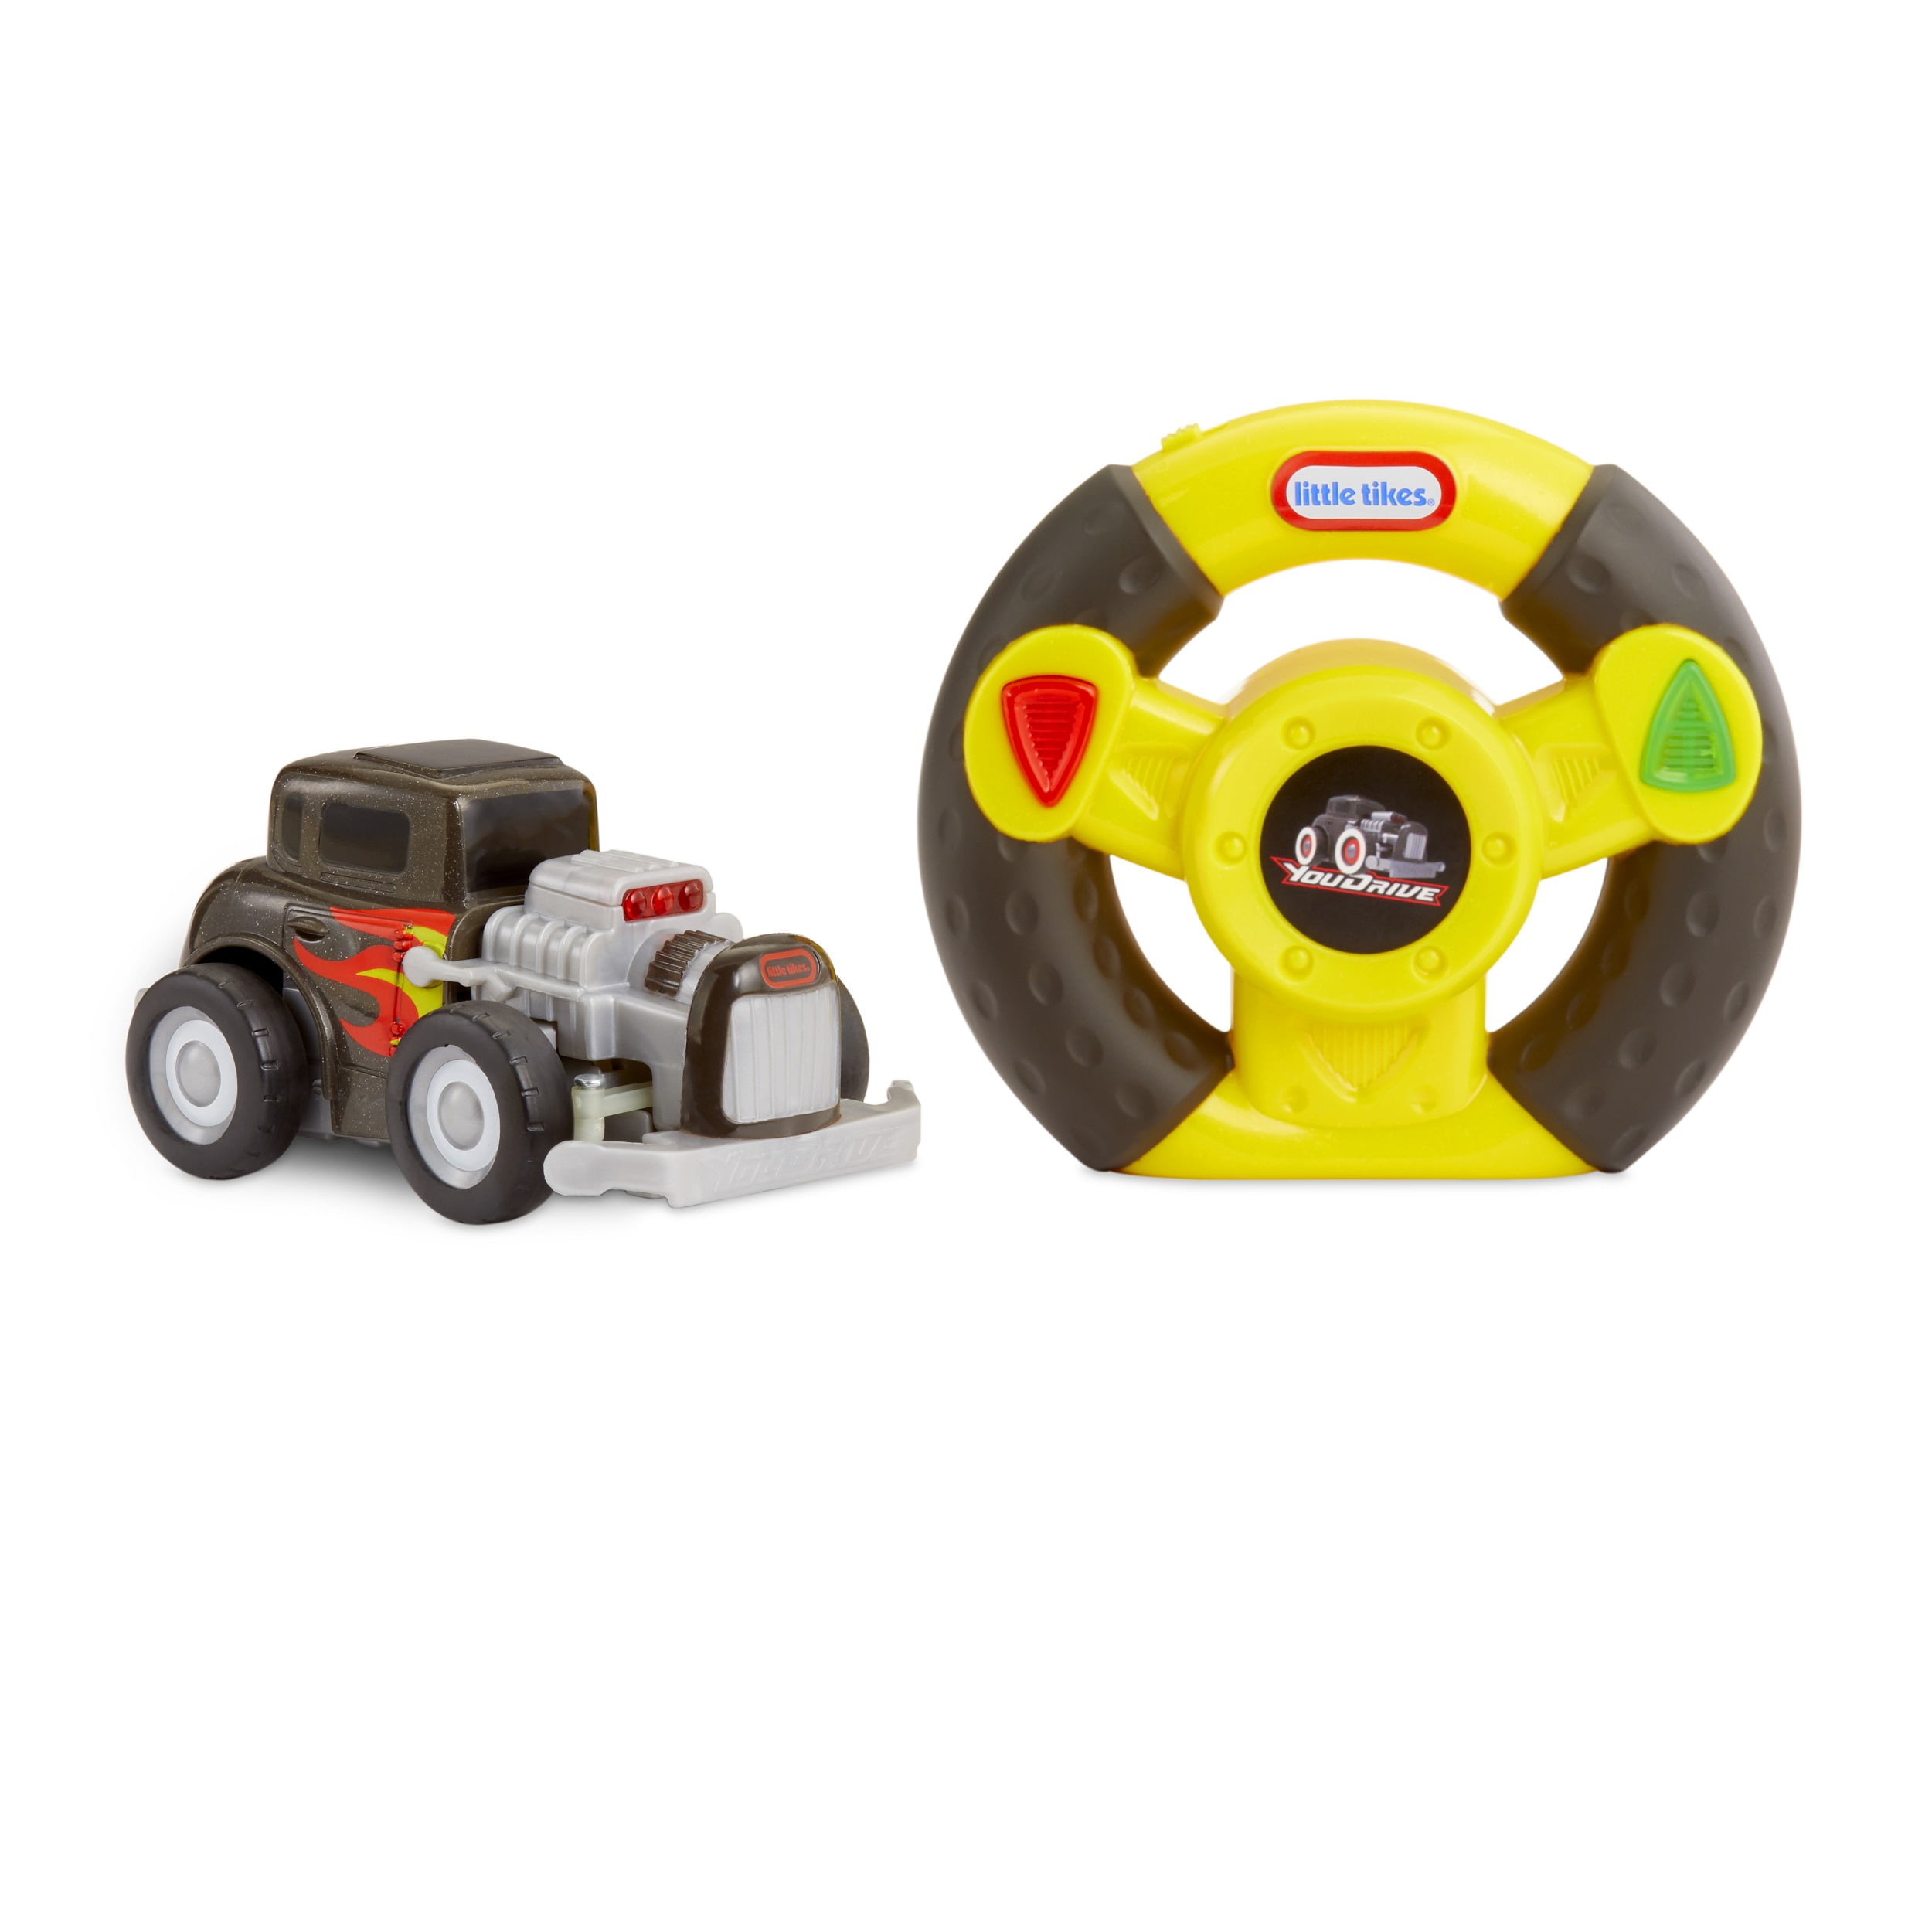 little tikes fantastic firsts spinning remote control rc car